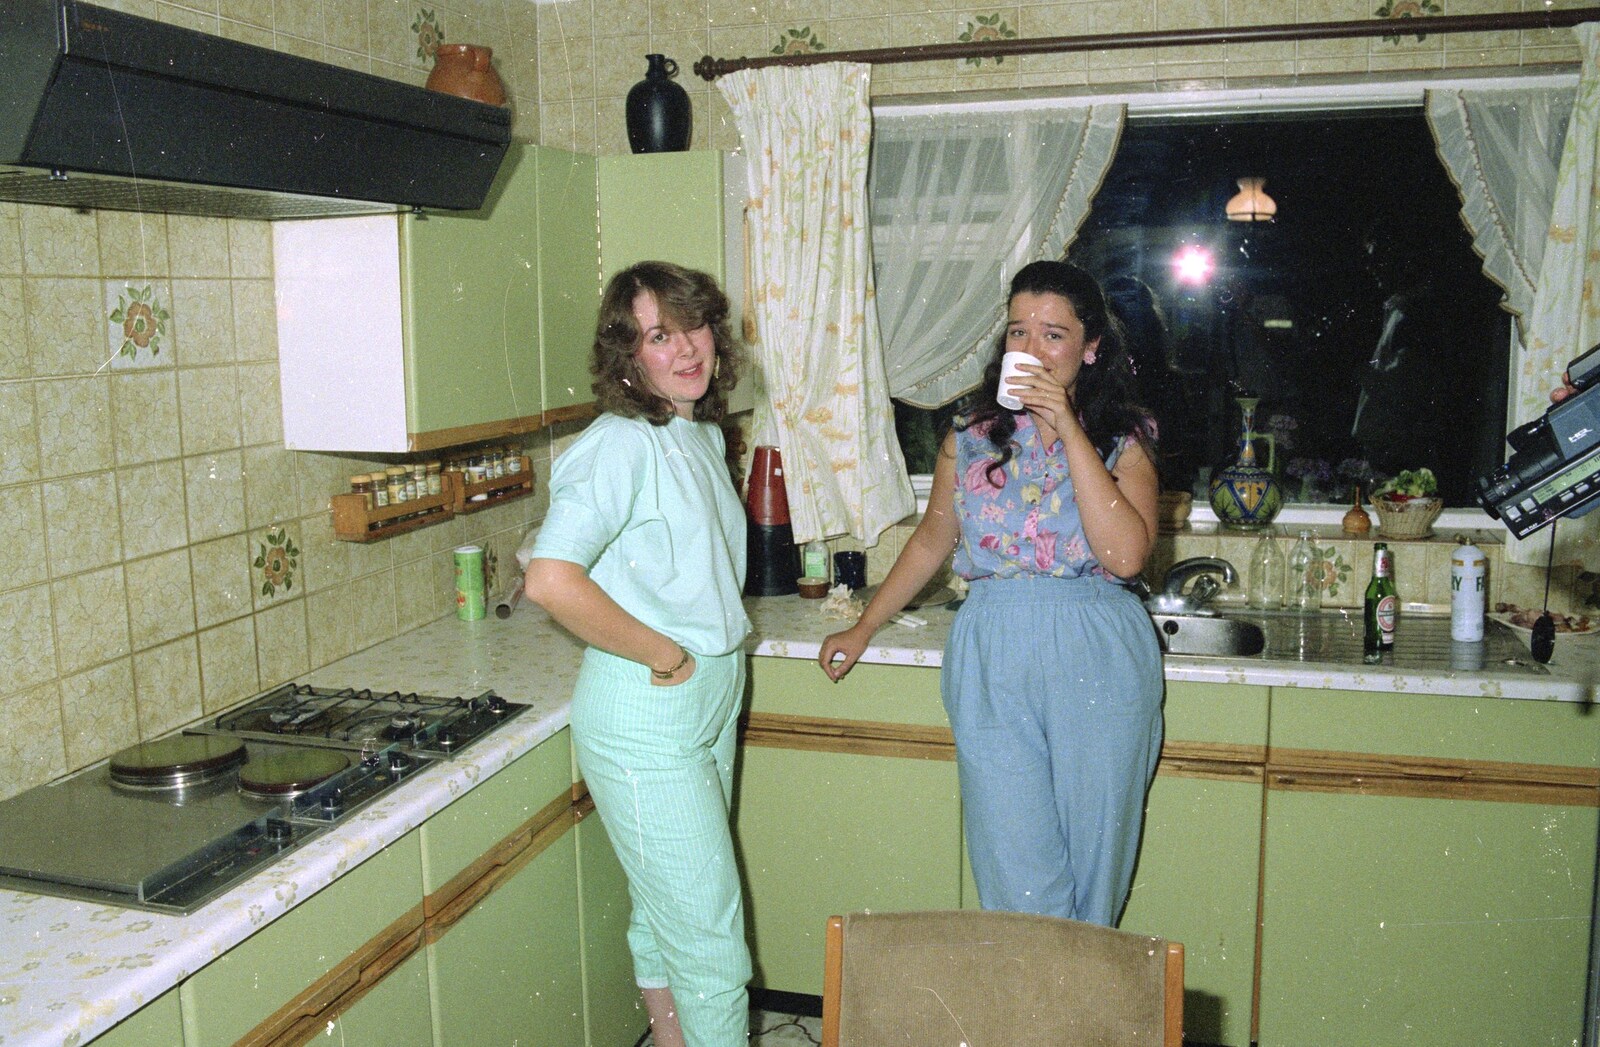 Chris and Phil's Party, Hordle, Hampshire - 6th September 1989: In the kitchen, with a massive 80s video camera